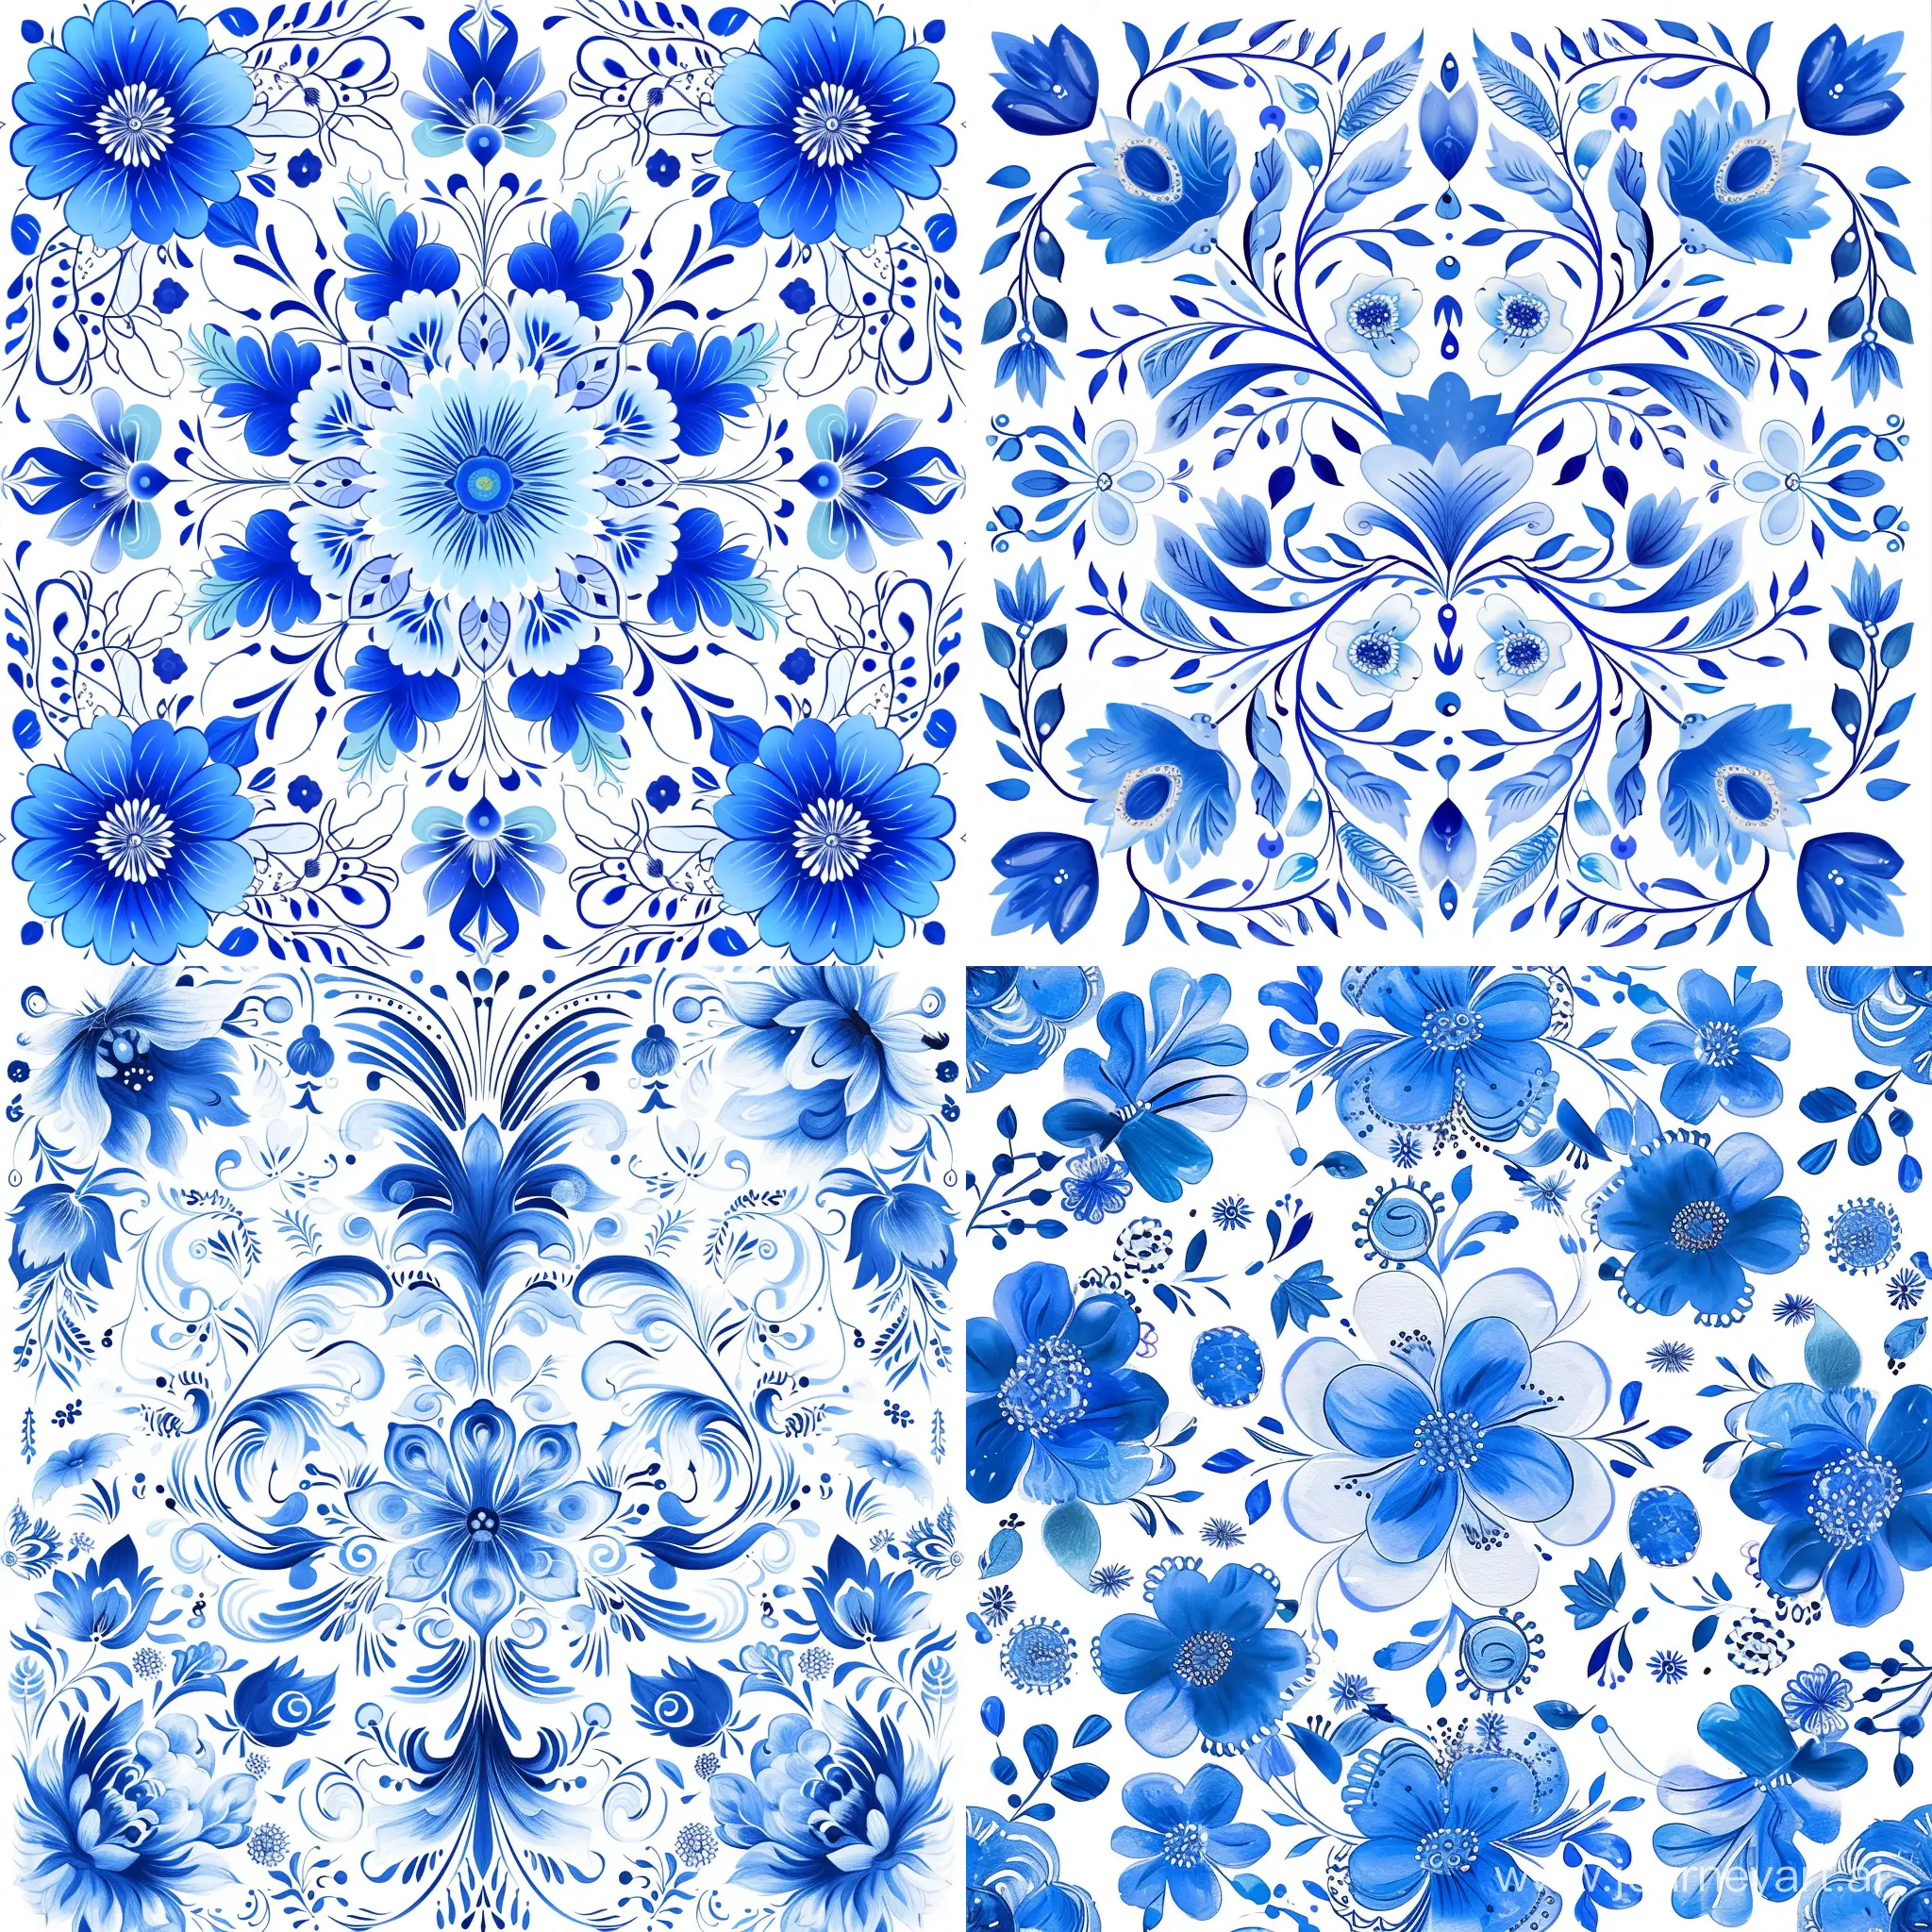 Gzhel-Inspired-Psychedelic-Art-with-White-Blue-and-Light-Blue-Colors